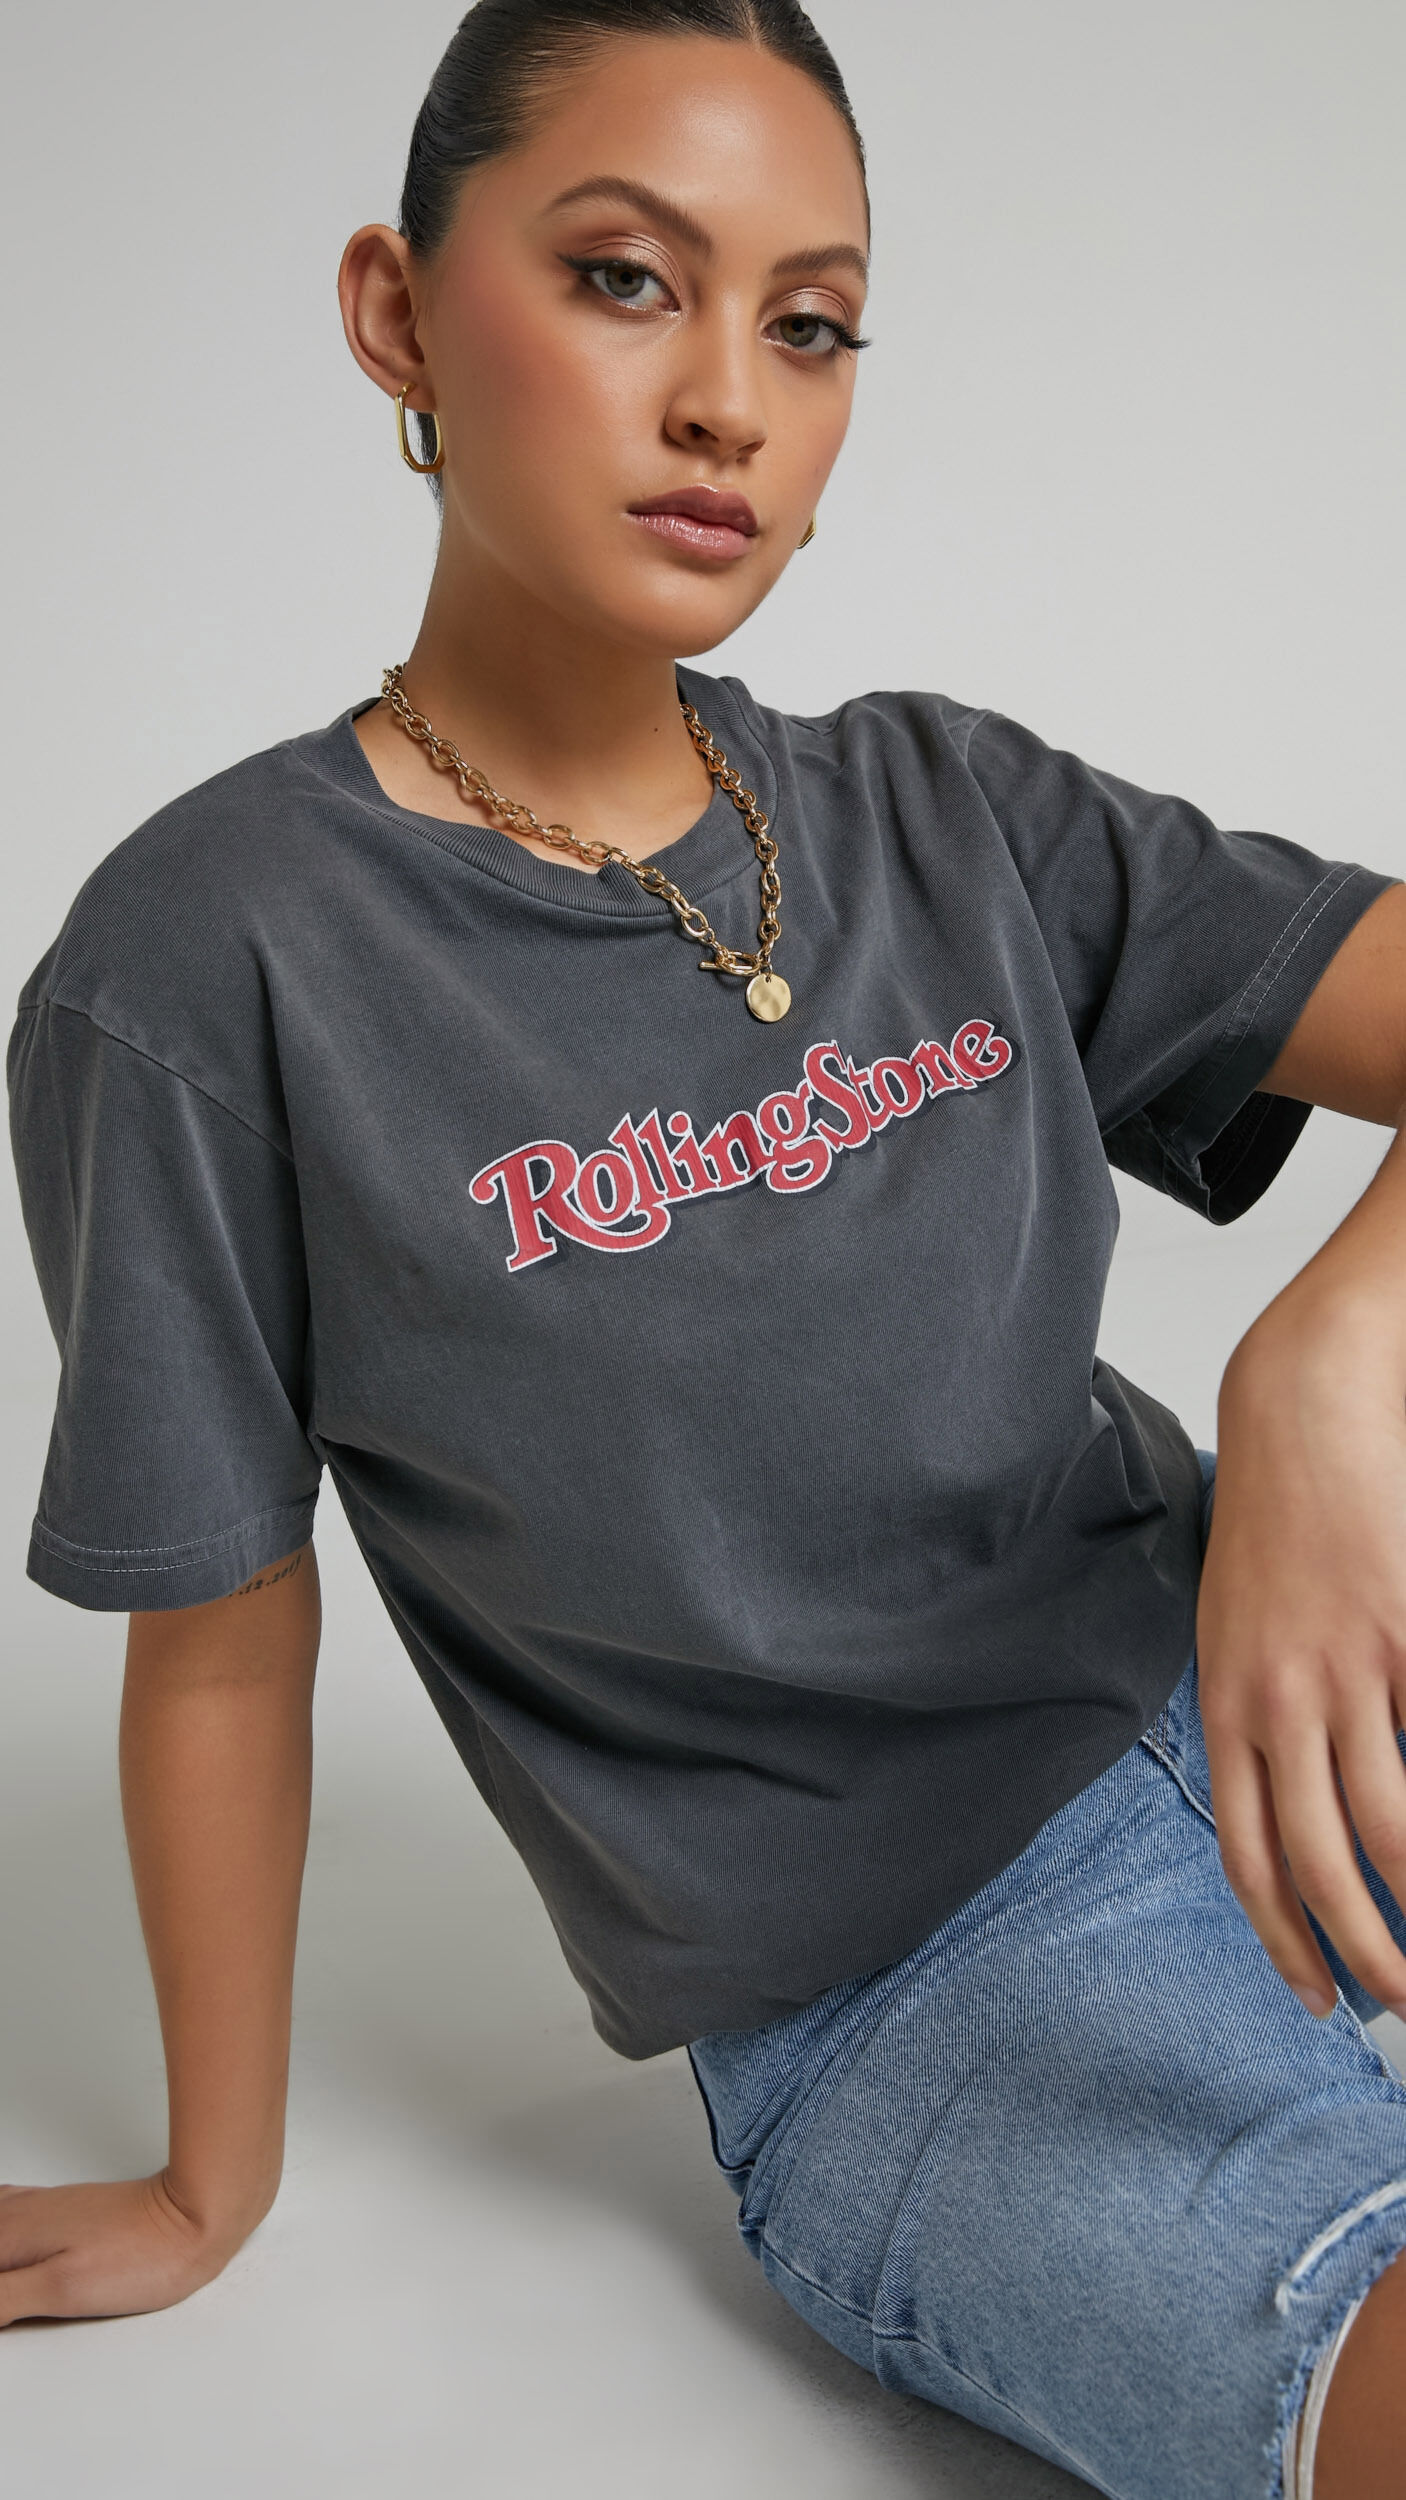 Rolla's - Rolling Stone 1981 Tomboy Tee in Washed Black - 06, BLK1, super-hi-res image number null